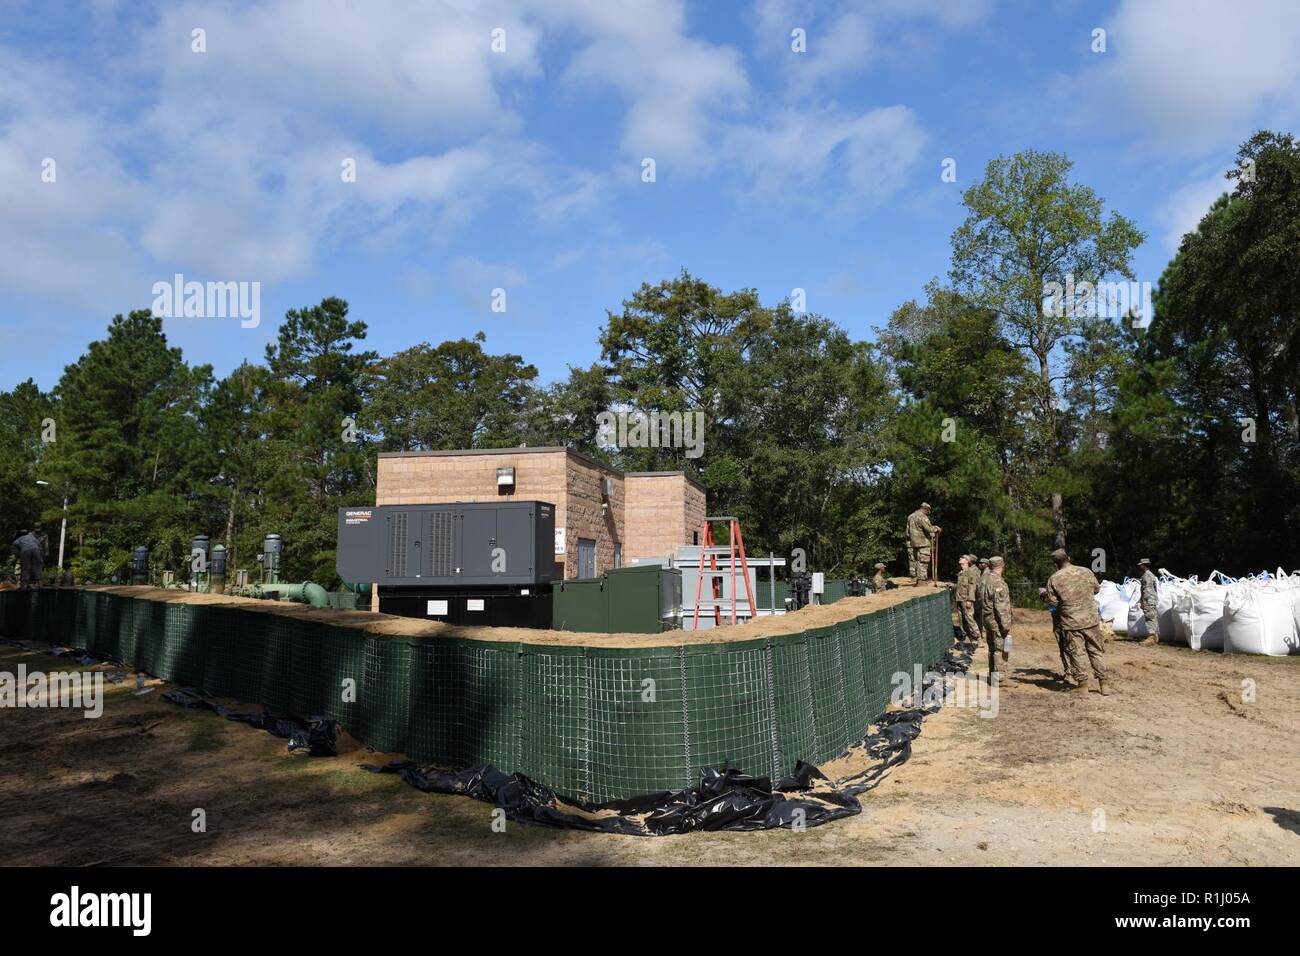 Mixed units of South Carolina National Guard Engineers and Transportation Corps are working round the clock to build flood water abatement barriers to protect the raw water pumping plant in Pawleys Island, S.C., Sept. 24, 2018. The purpose of this project is to protect the fresh water supply for surrounding areas as extensive flooding is anticipated from the aftermath of Hurricane Florence last week. The South Carolina National Guard has over 2,100 Soldiers and Airmen on duty, including support from the Pennsylvania, Tennessee, New York, Alaska, Maryland, Georgia, Virginia and Mississippi Nati Stock Photo